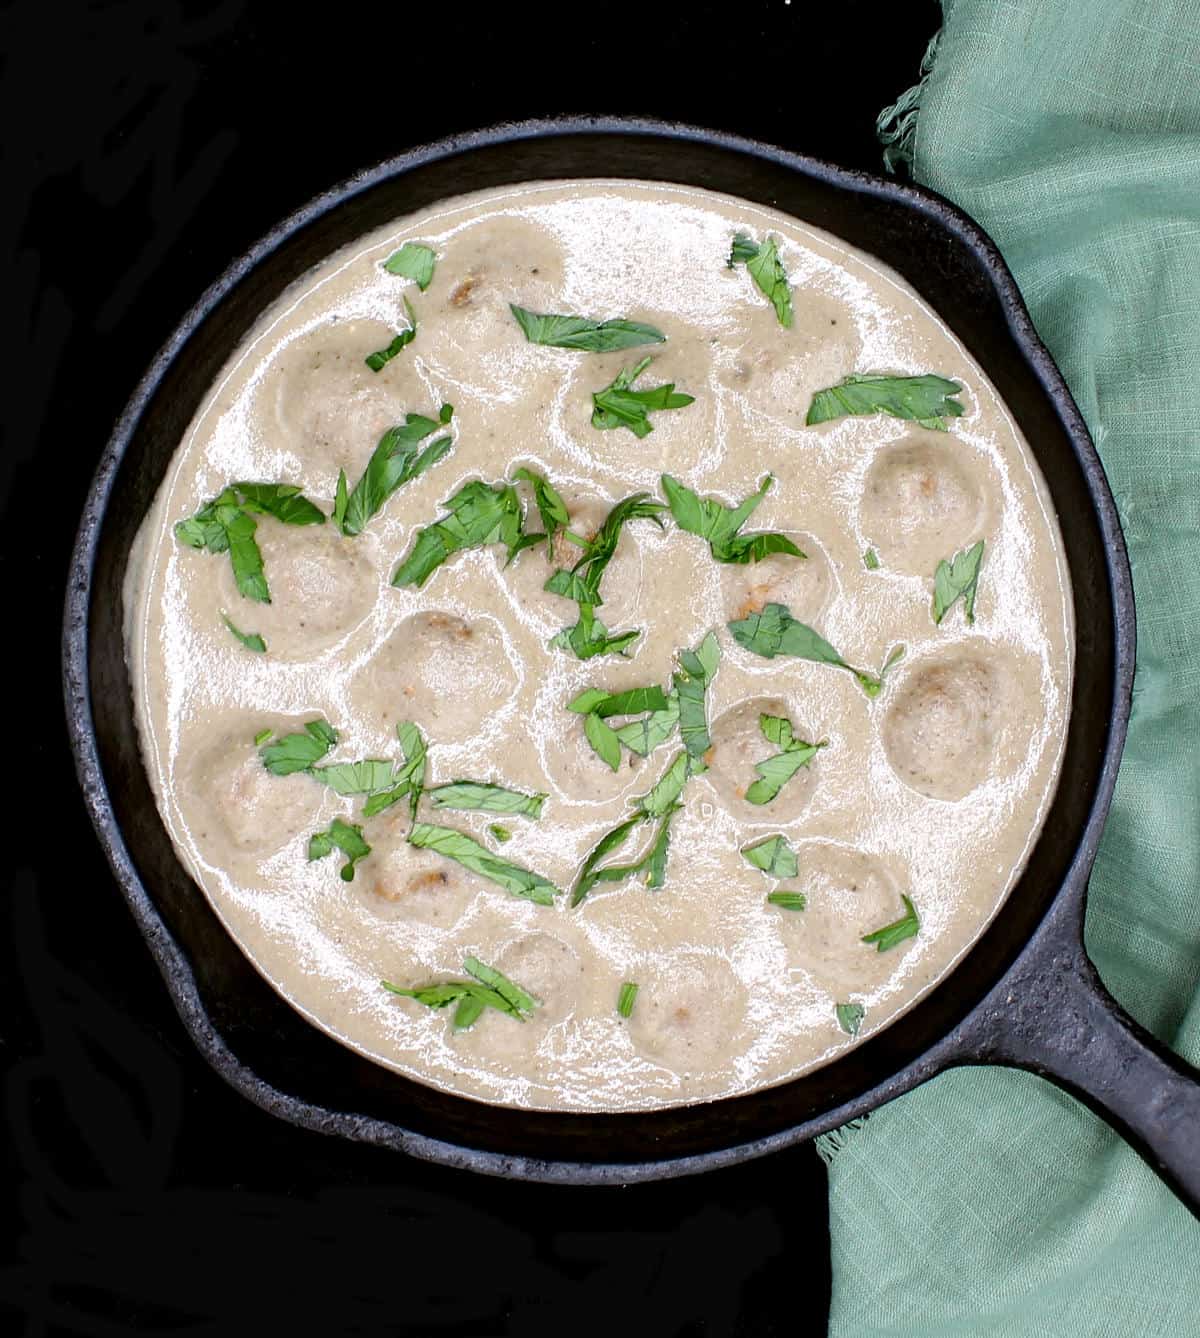 A cast iron skillet with vegan air fryer meatballs in a creamy mushroom sauce garnished with parsley.